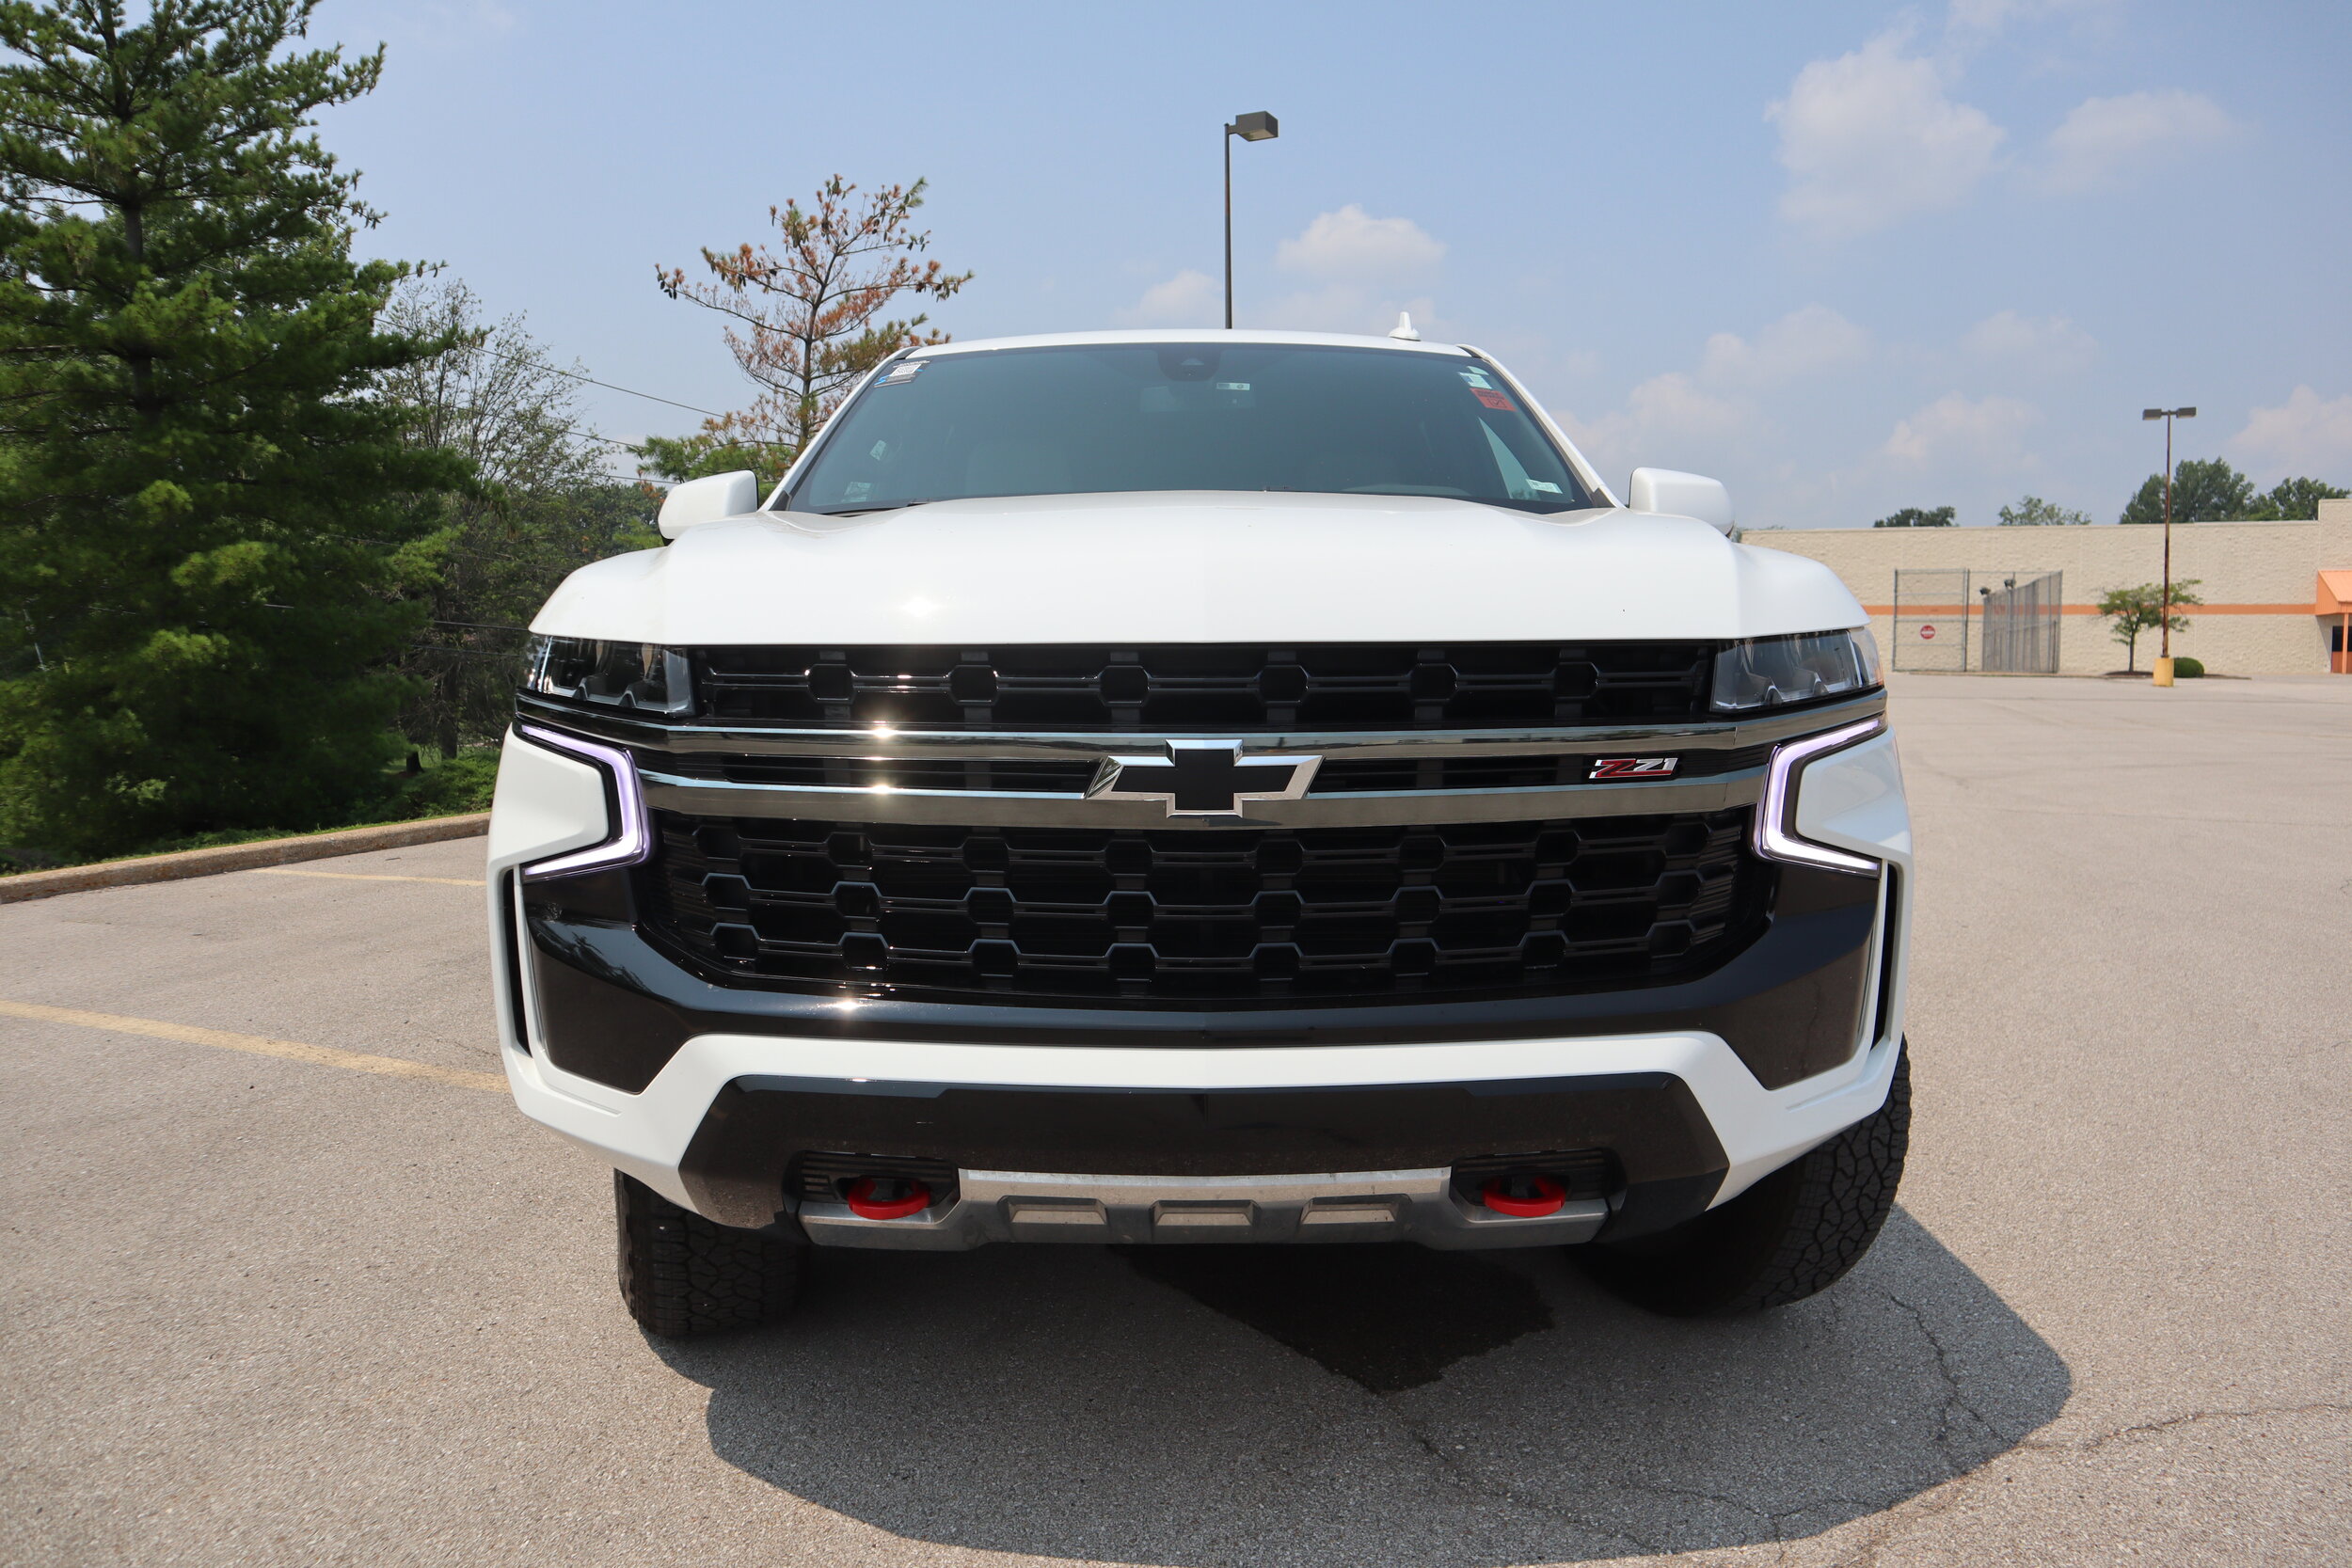 2021 Tahoe Grill